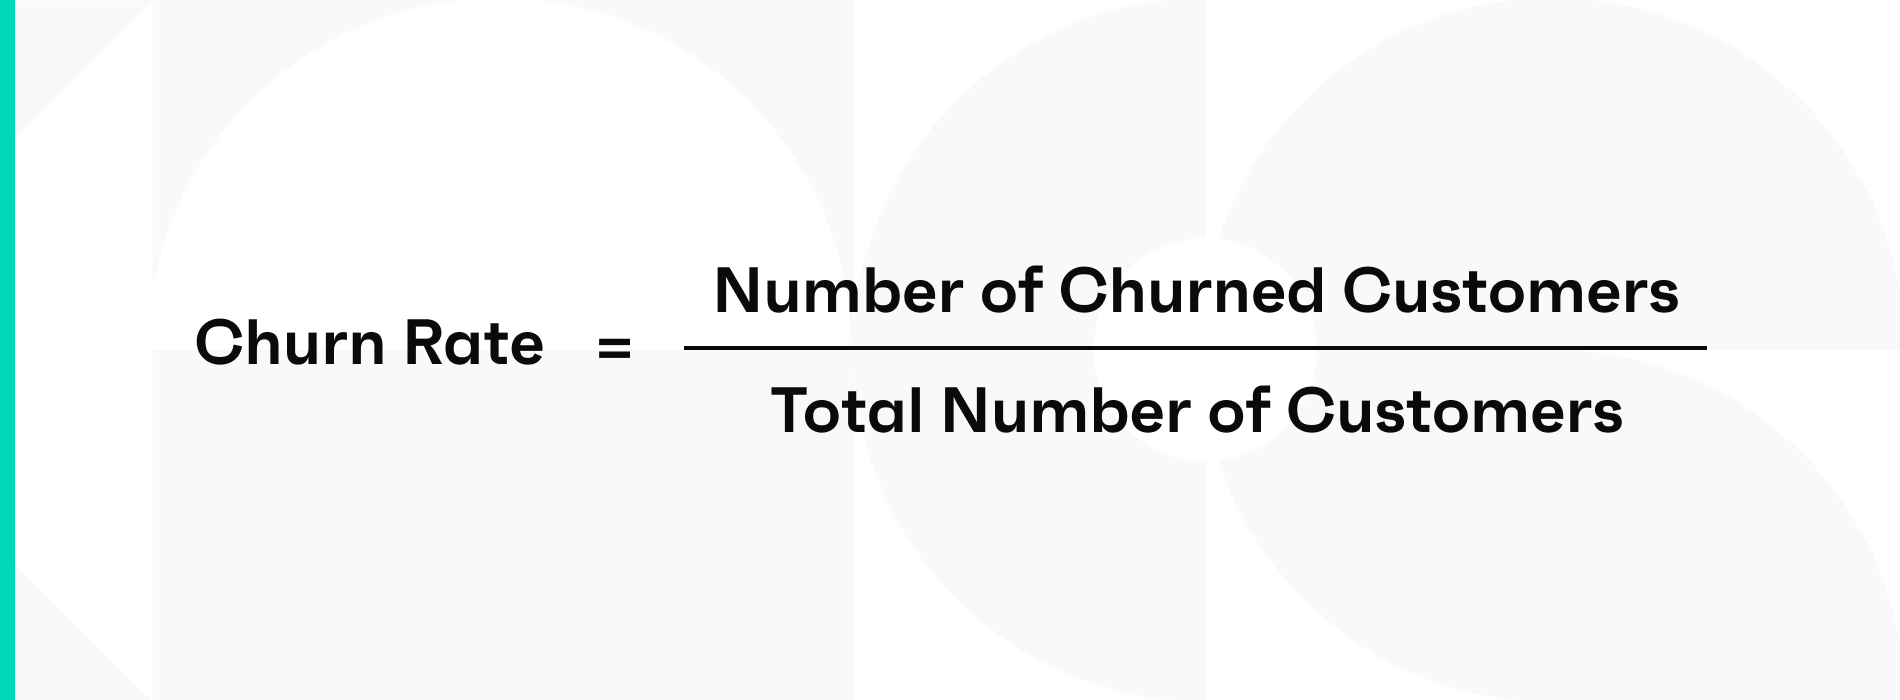 Churn rate = number of churned customers / total number of customers